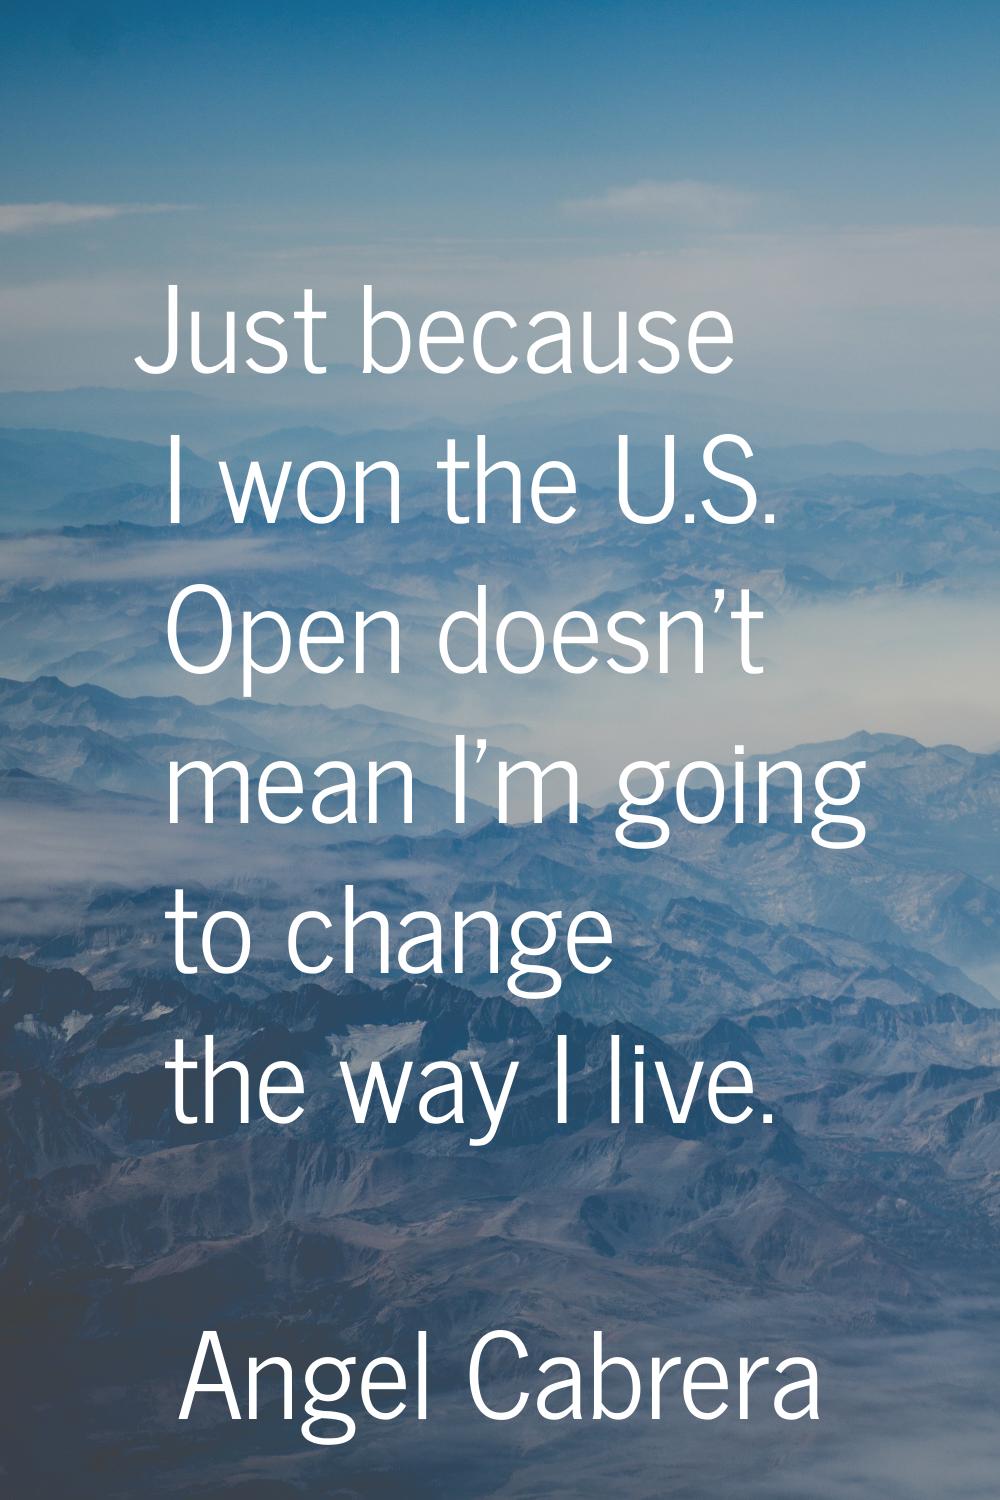 Just because I won the U.S. Open doesn't mean I'm going to change the way I live.